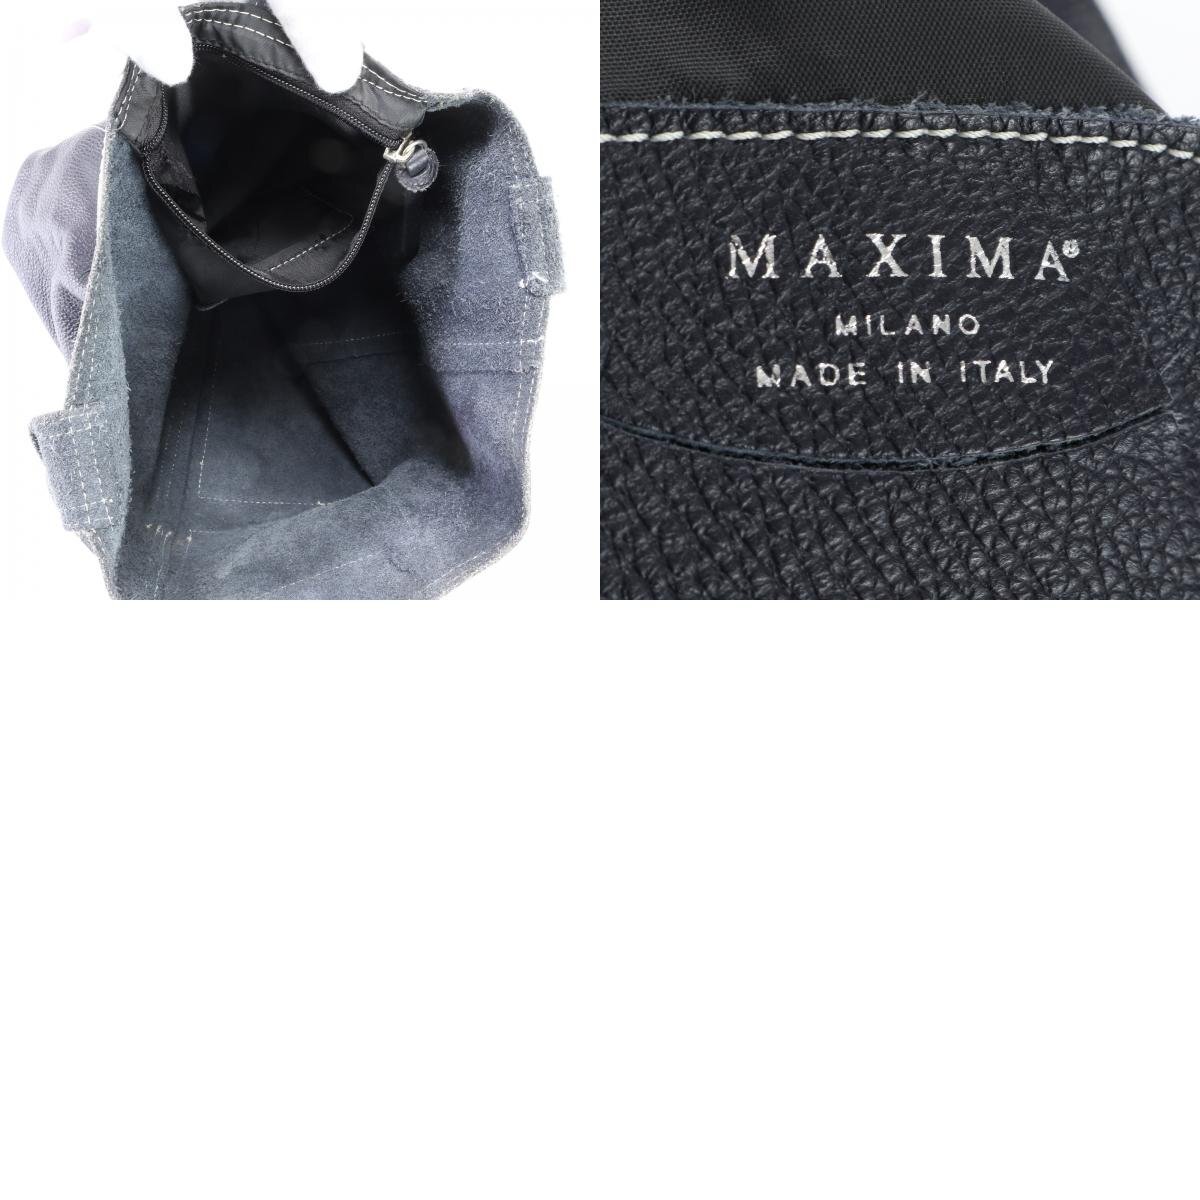 1 jpy # beautiful goods MAXIMA Maxima leather tote bag shoulder business commuting document bag original leather navy navy blue brand A4 men's HHM P3-10